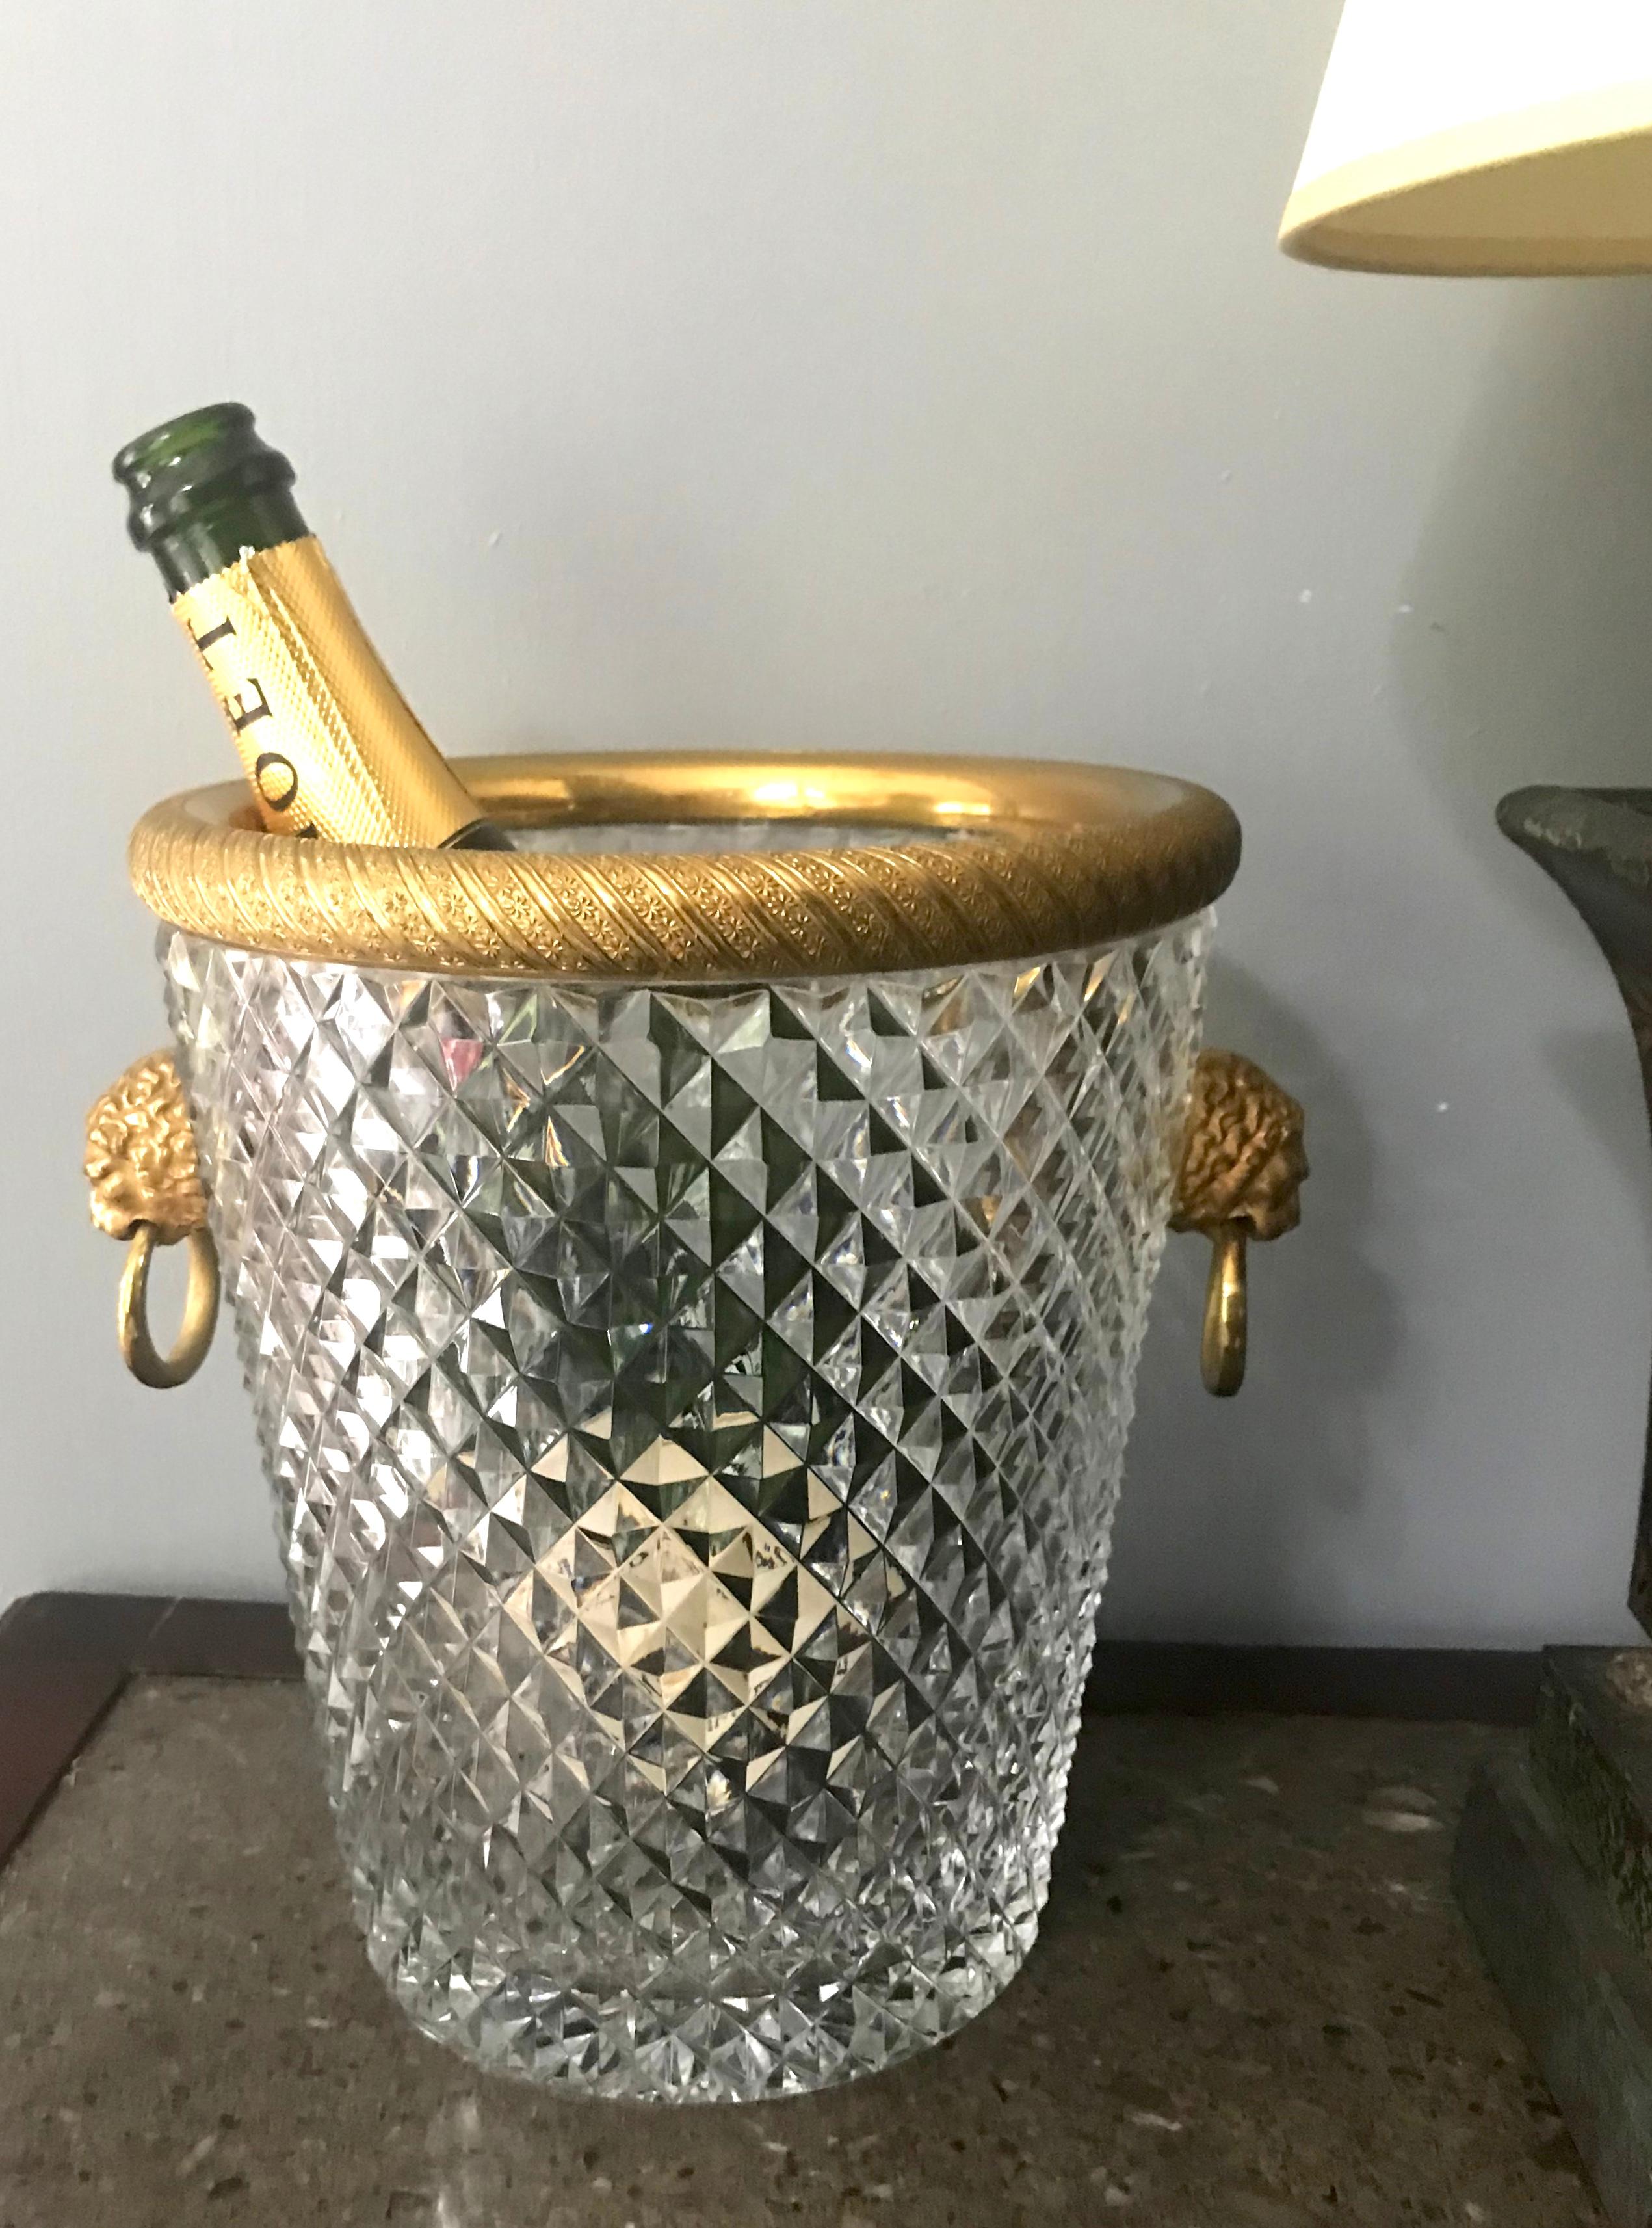 Crystal and ormolu lion head ring-handle champagne ice bucket. Elegant diapered crystal basin with gilt rim and finely chased lion ring handles perfect for chilling Sancerre or champagne or filled with ice for drinks on the porch. In very near